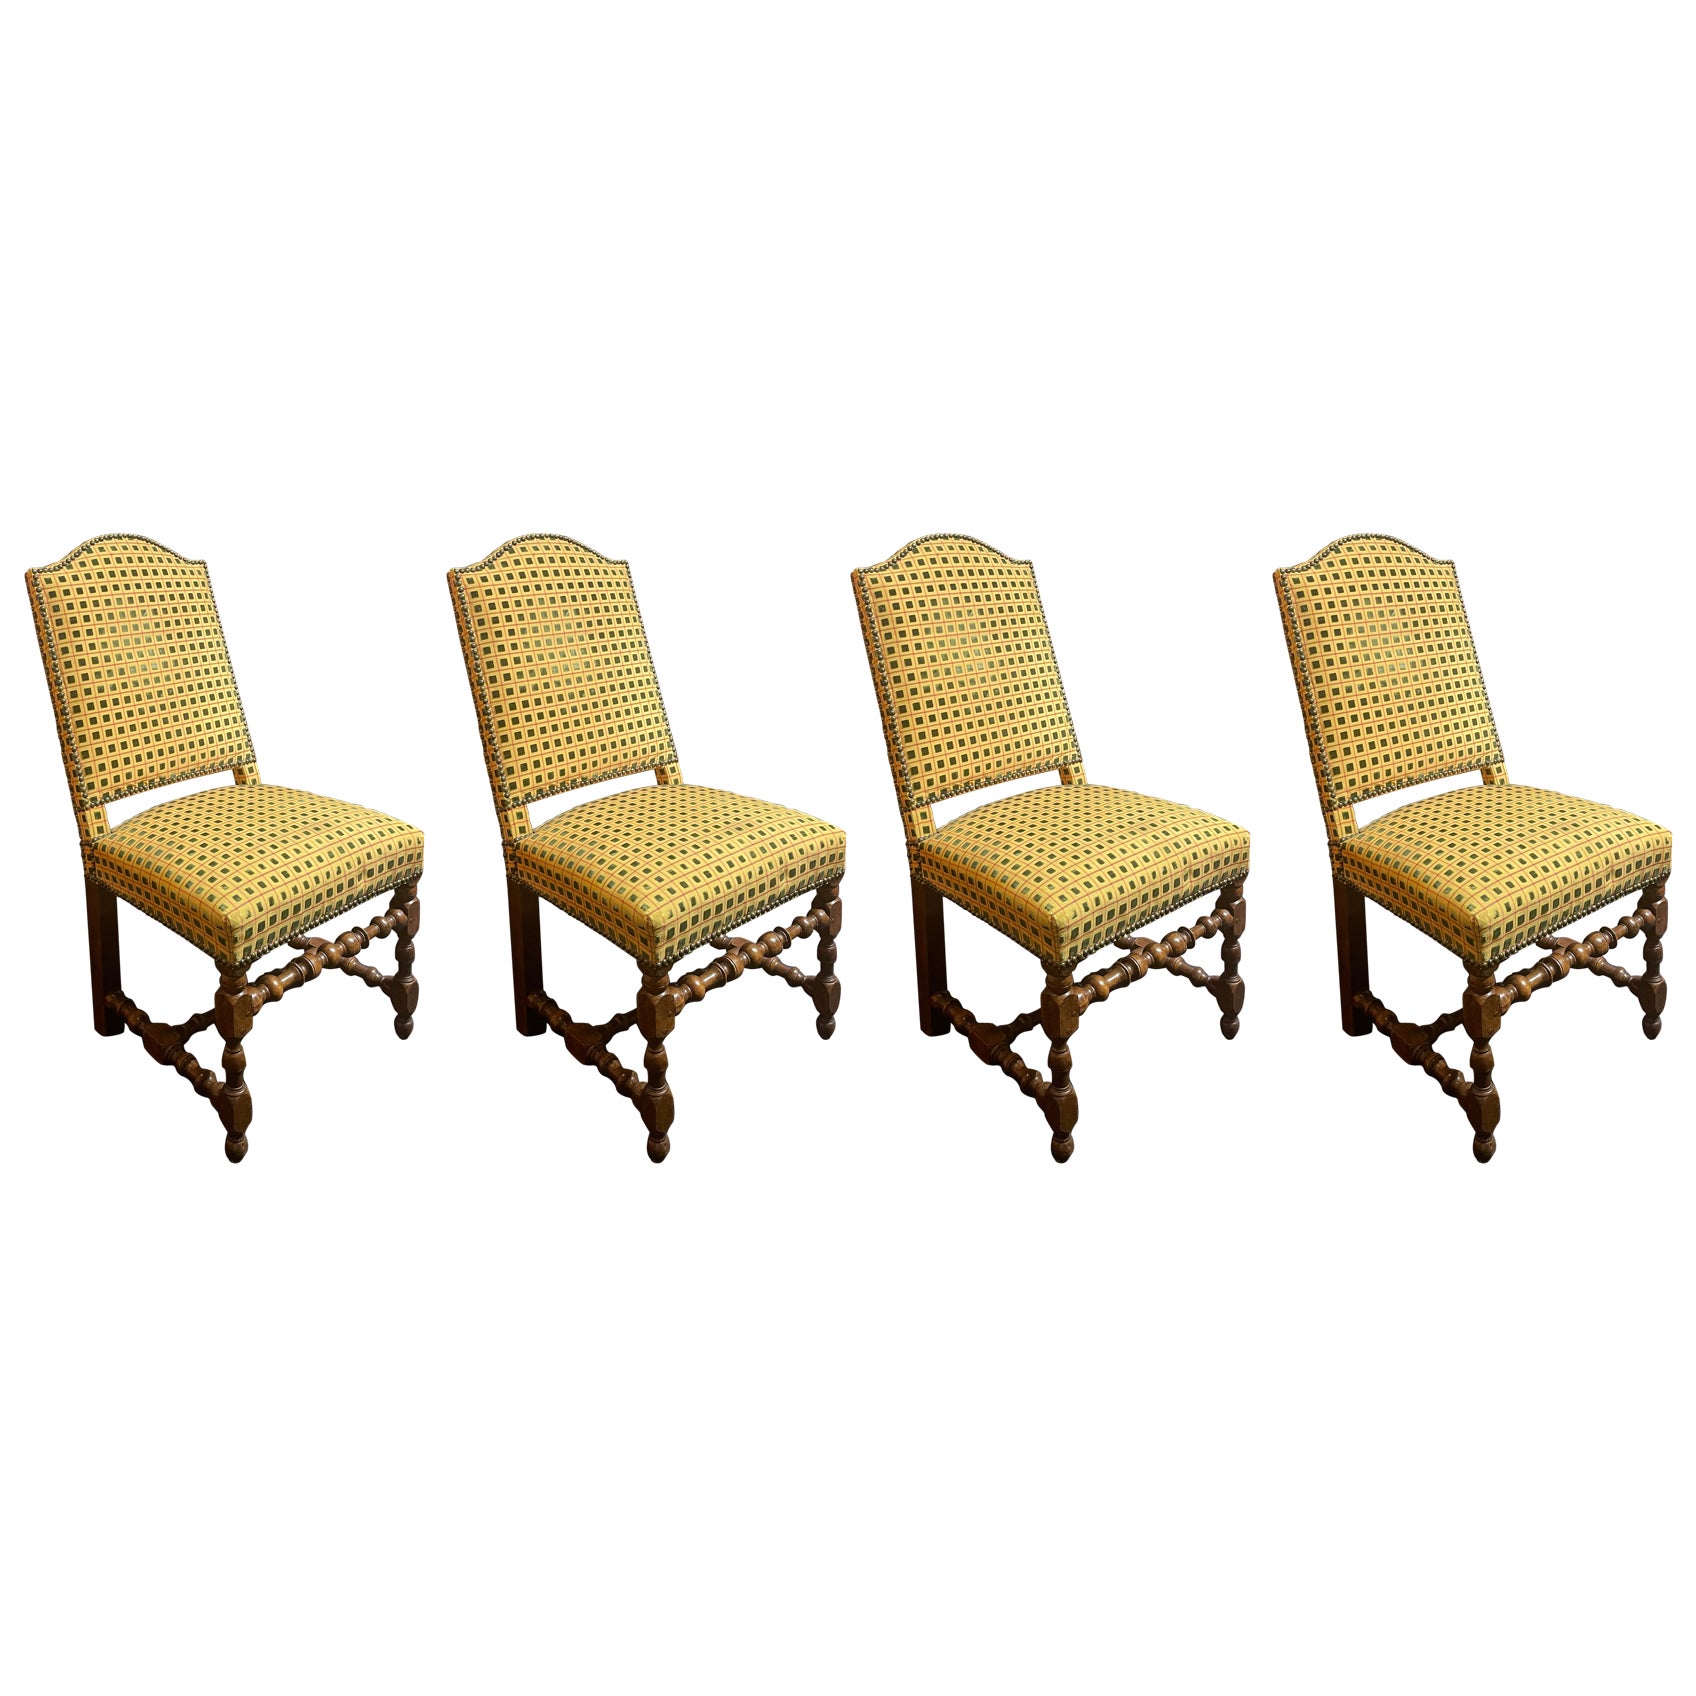 Set of Four Chairs with a Yellow Velvet Upholstery